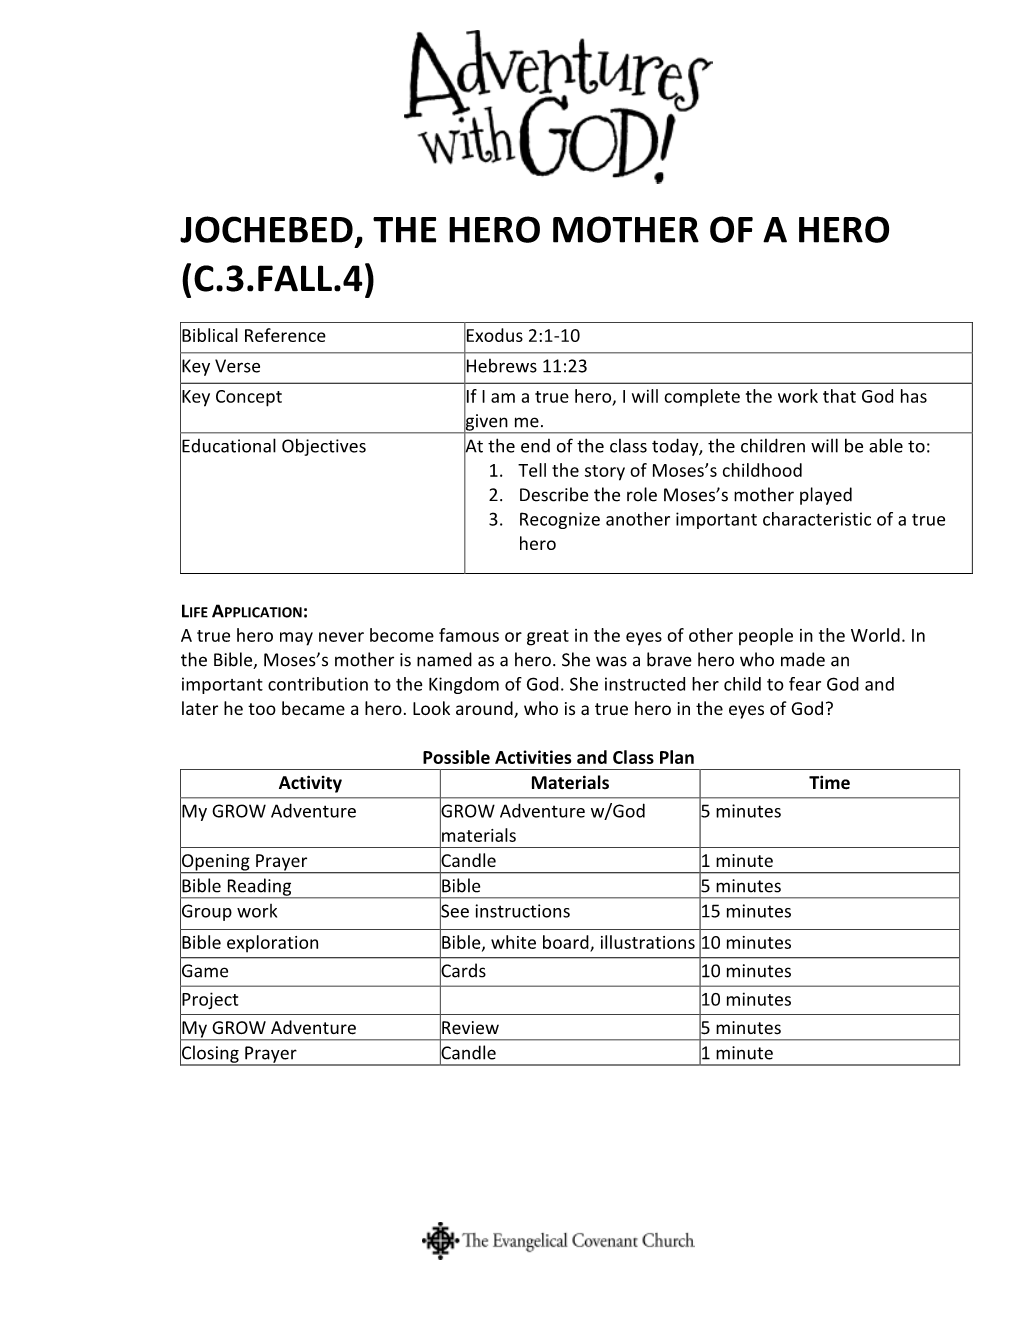 Jochebed, the Hero Mother of a Hero (C.3.Fall.4)